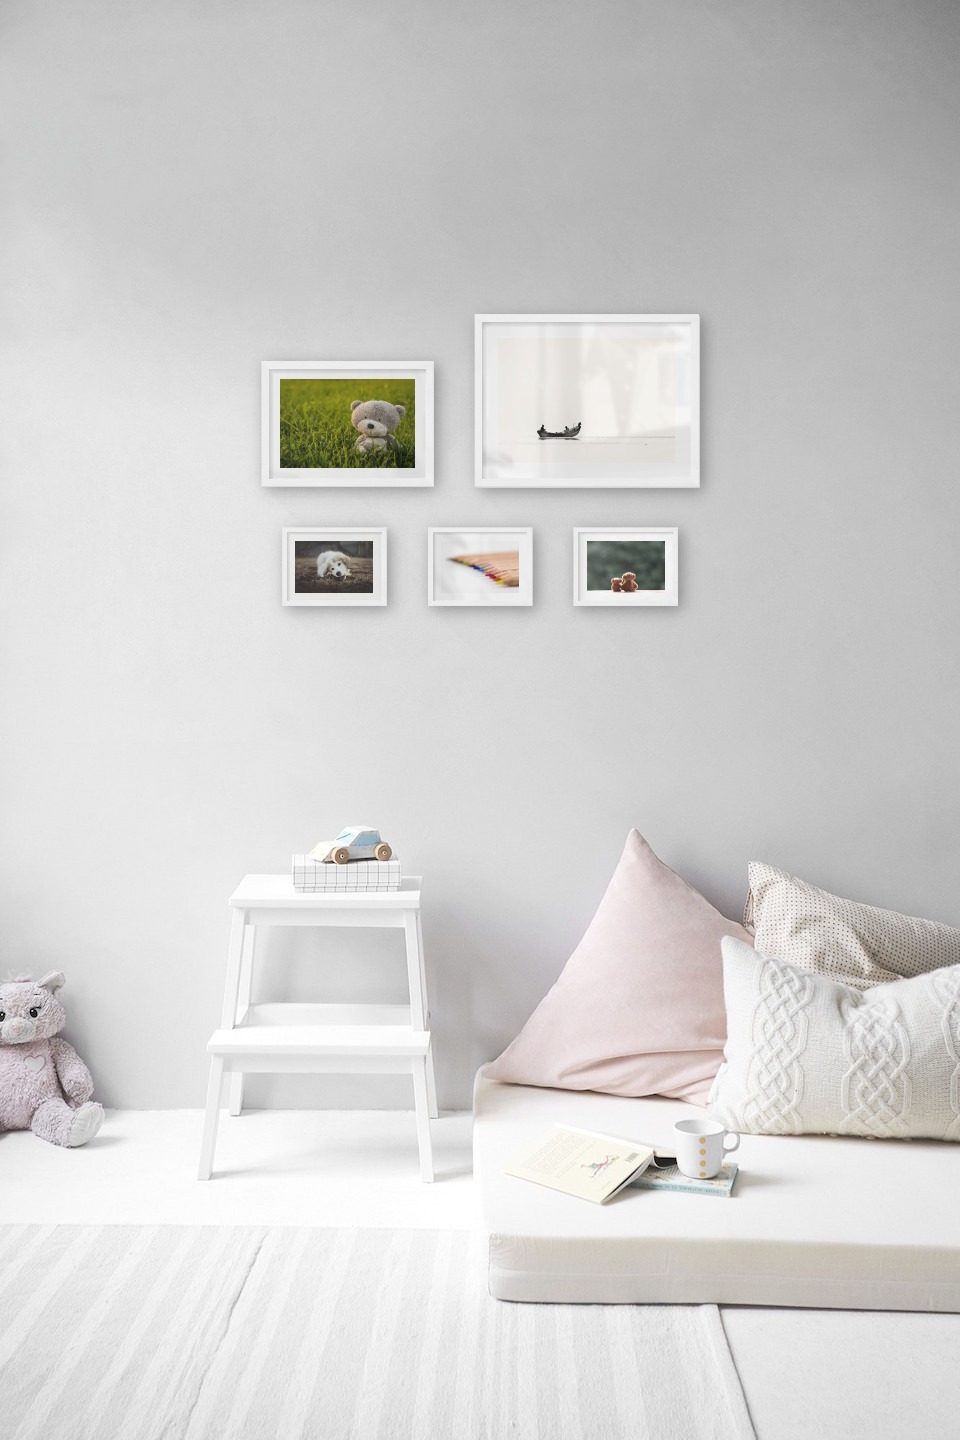 Gallery wall with picture frames in white in sizes 21x30, 30x40 and 13x18 with prints "Teddy bear in a field", "People in boat", "Dog chewing", "Pencils in different colors" and "Teddy bears and greenery"